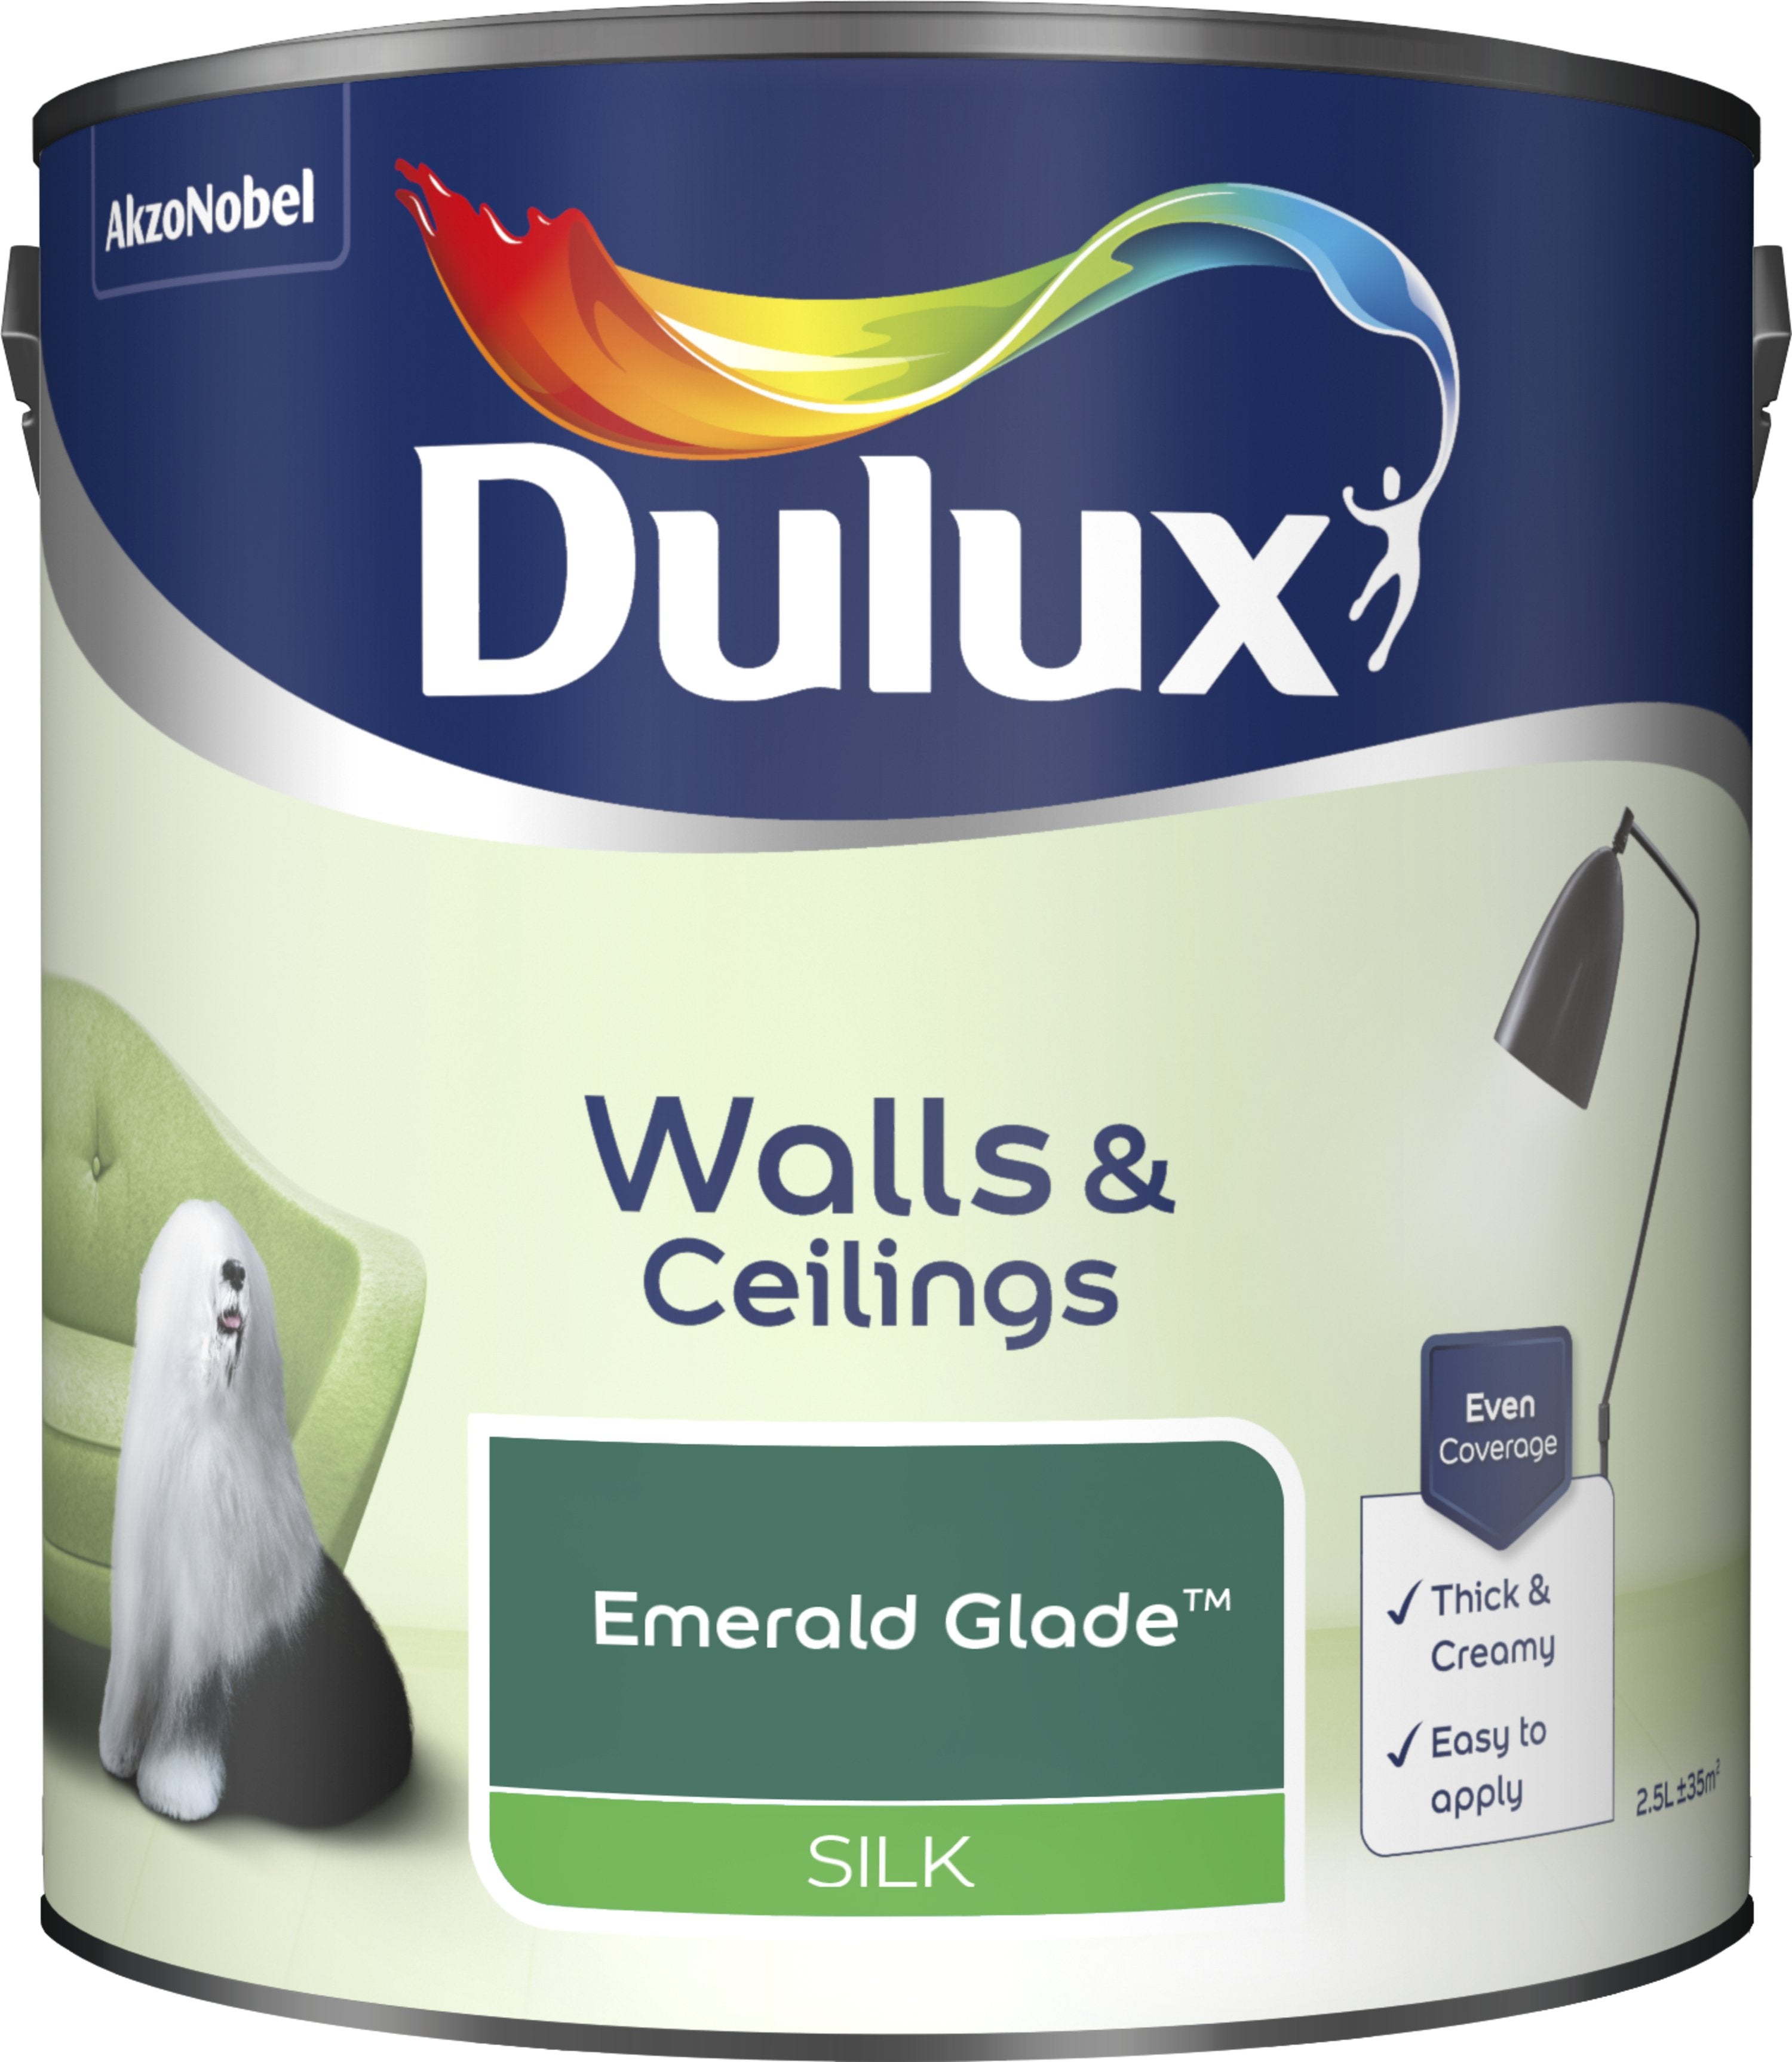 Dulux Silk Emulsion Paint For Walls And Ceilings - Emerald Glade 2.5L Garden & Diy  Home